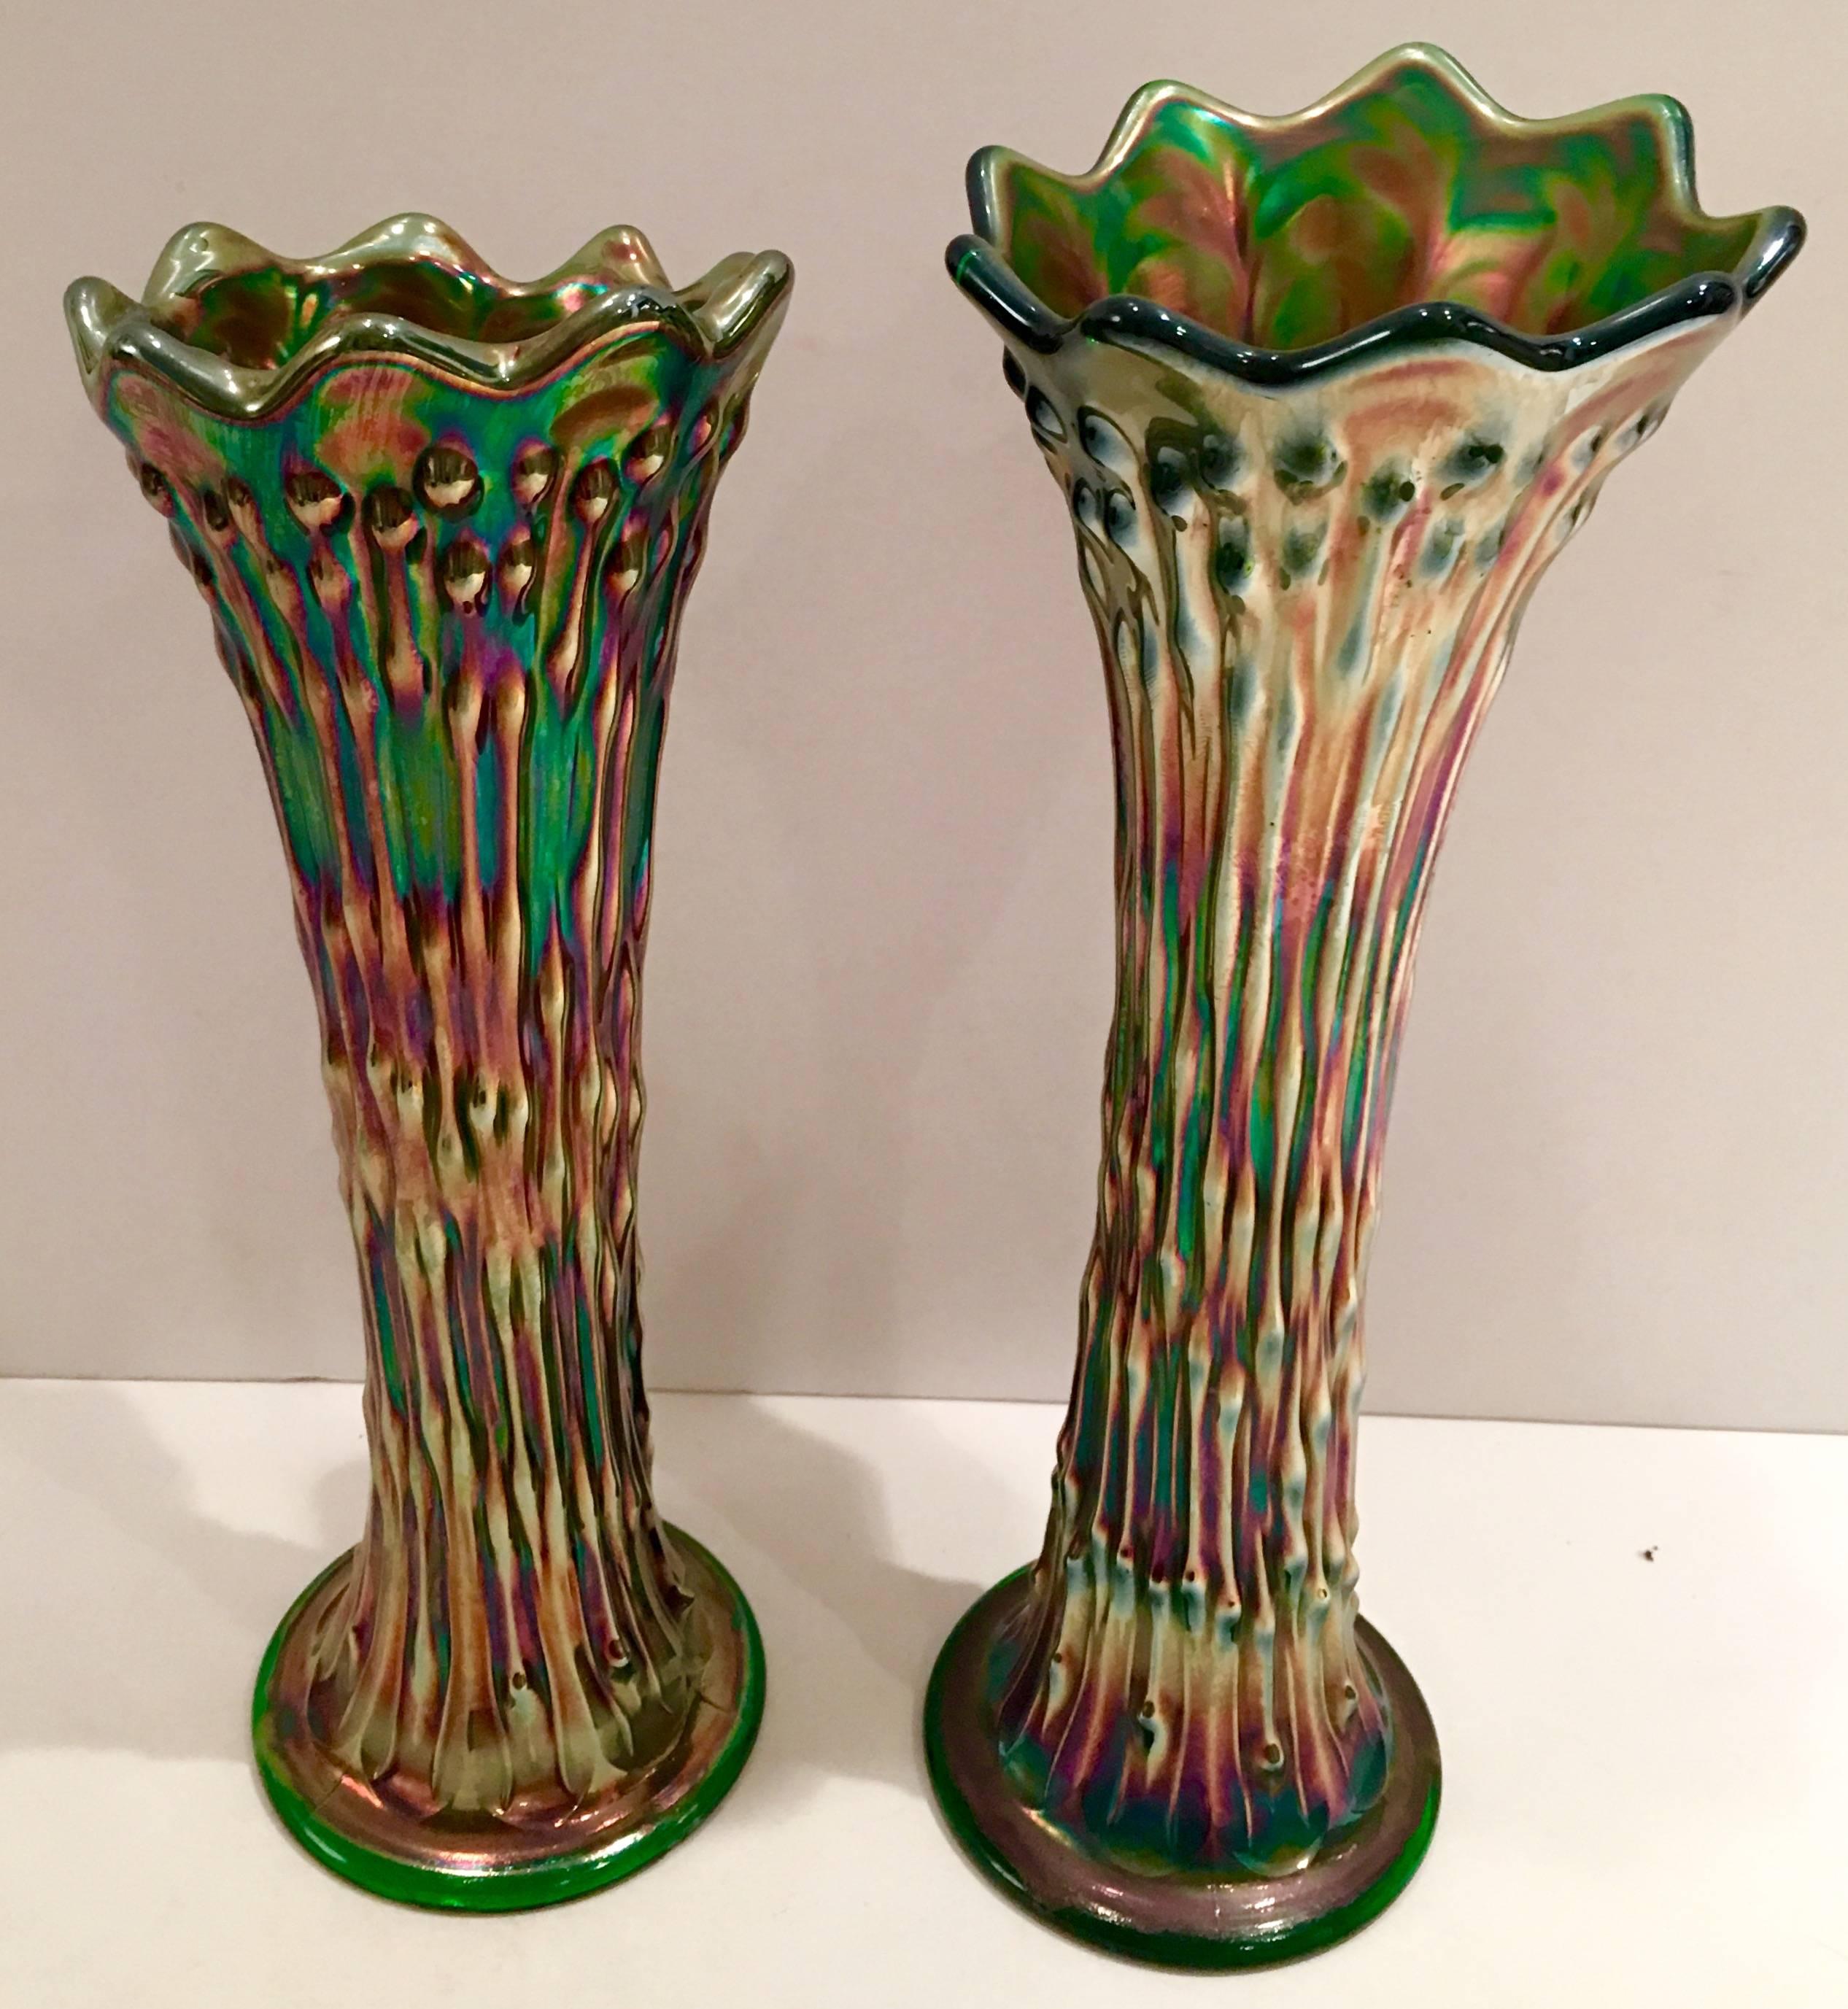 Beautiful pair of  Antique Fenton art glass emerald green iridescent vases. Each has the same makers mark on the underside. The smaller vase measures 10.5" height x 3.5" diameter.